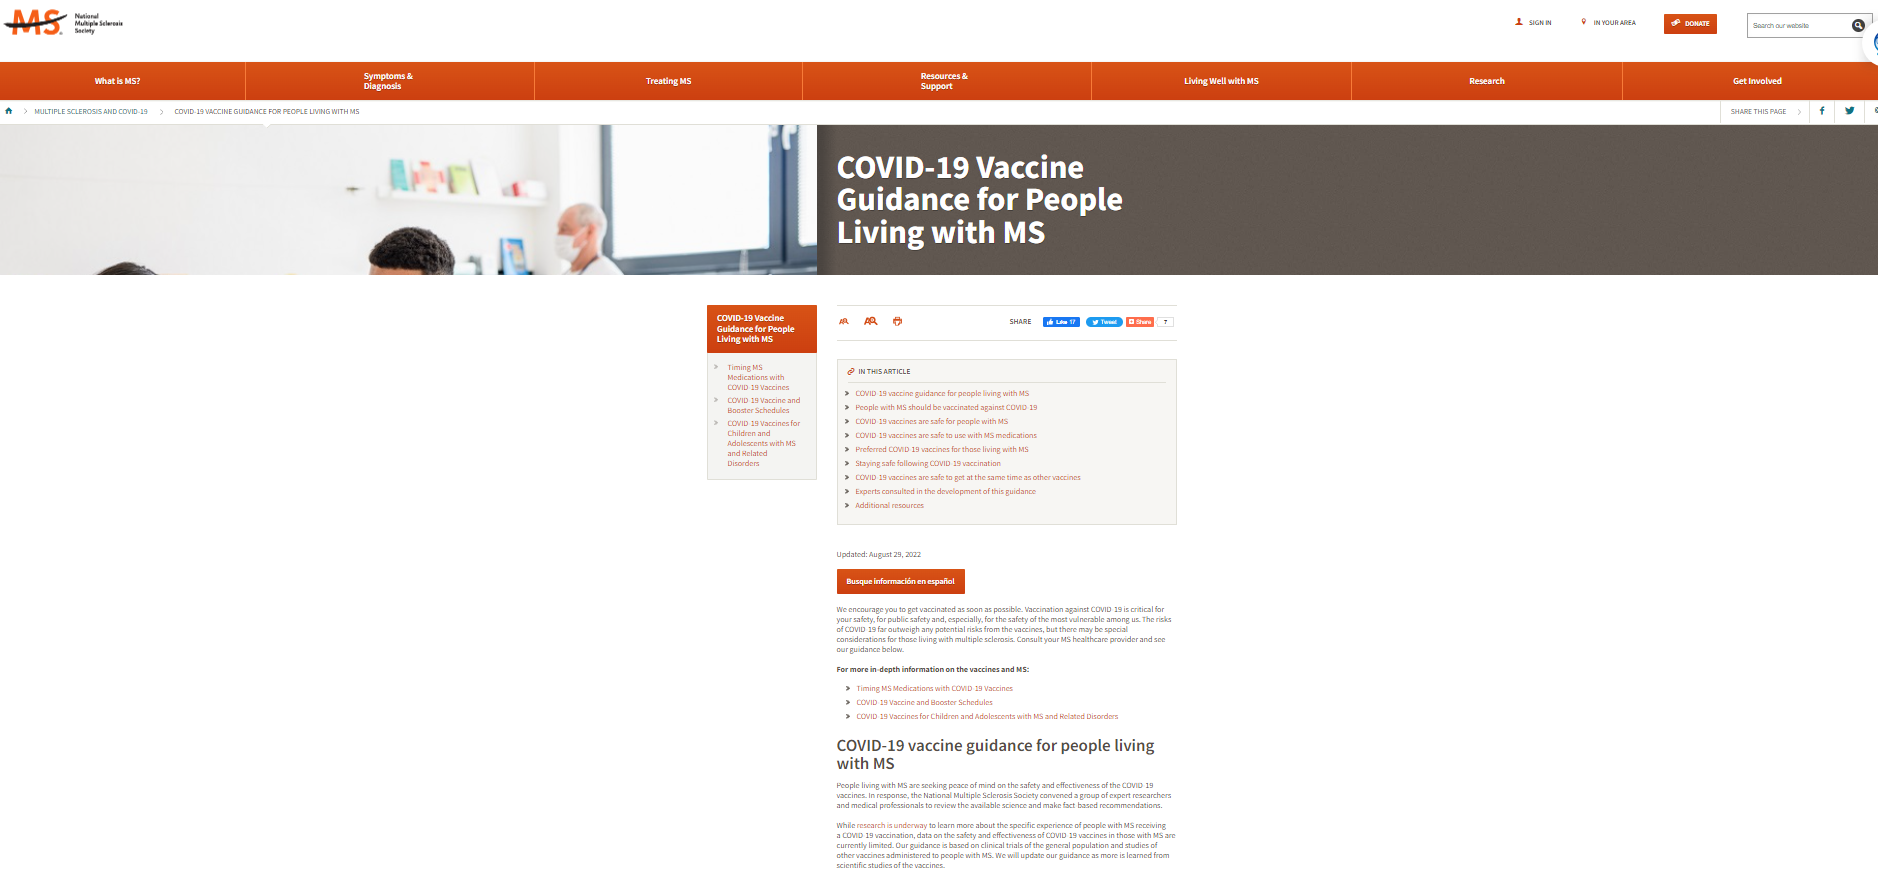 Website with orange and black National Multiple Sclerosis Society logo at the top left corner. Tile of the website is COVID-19 Vaccine Guidance for People Living with MS and it has a white background with orange and gray text boxes.